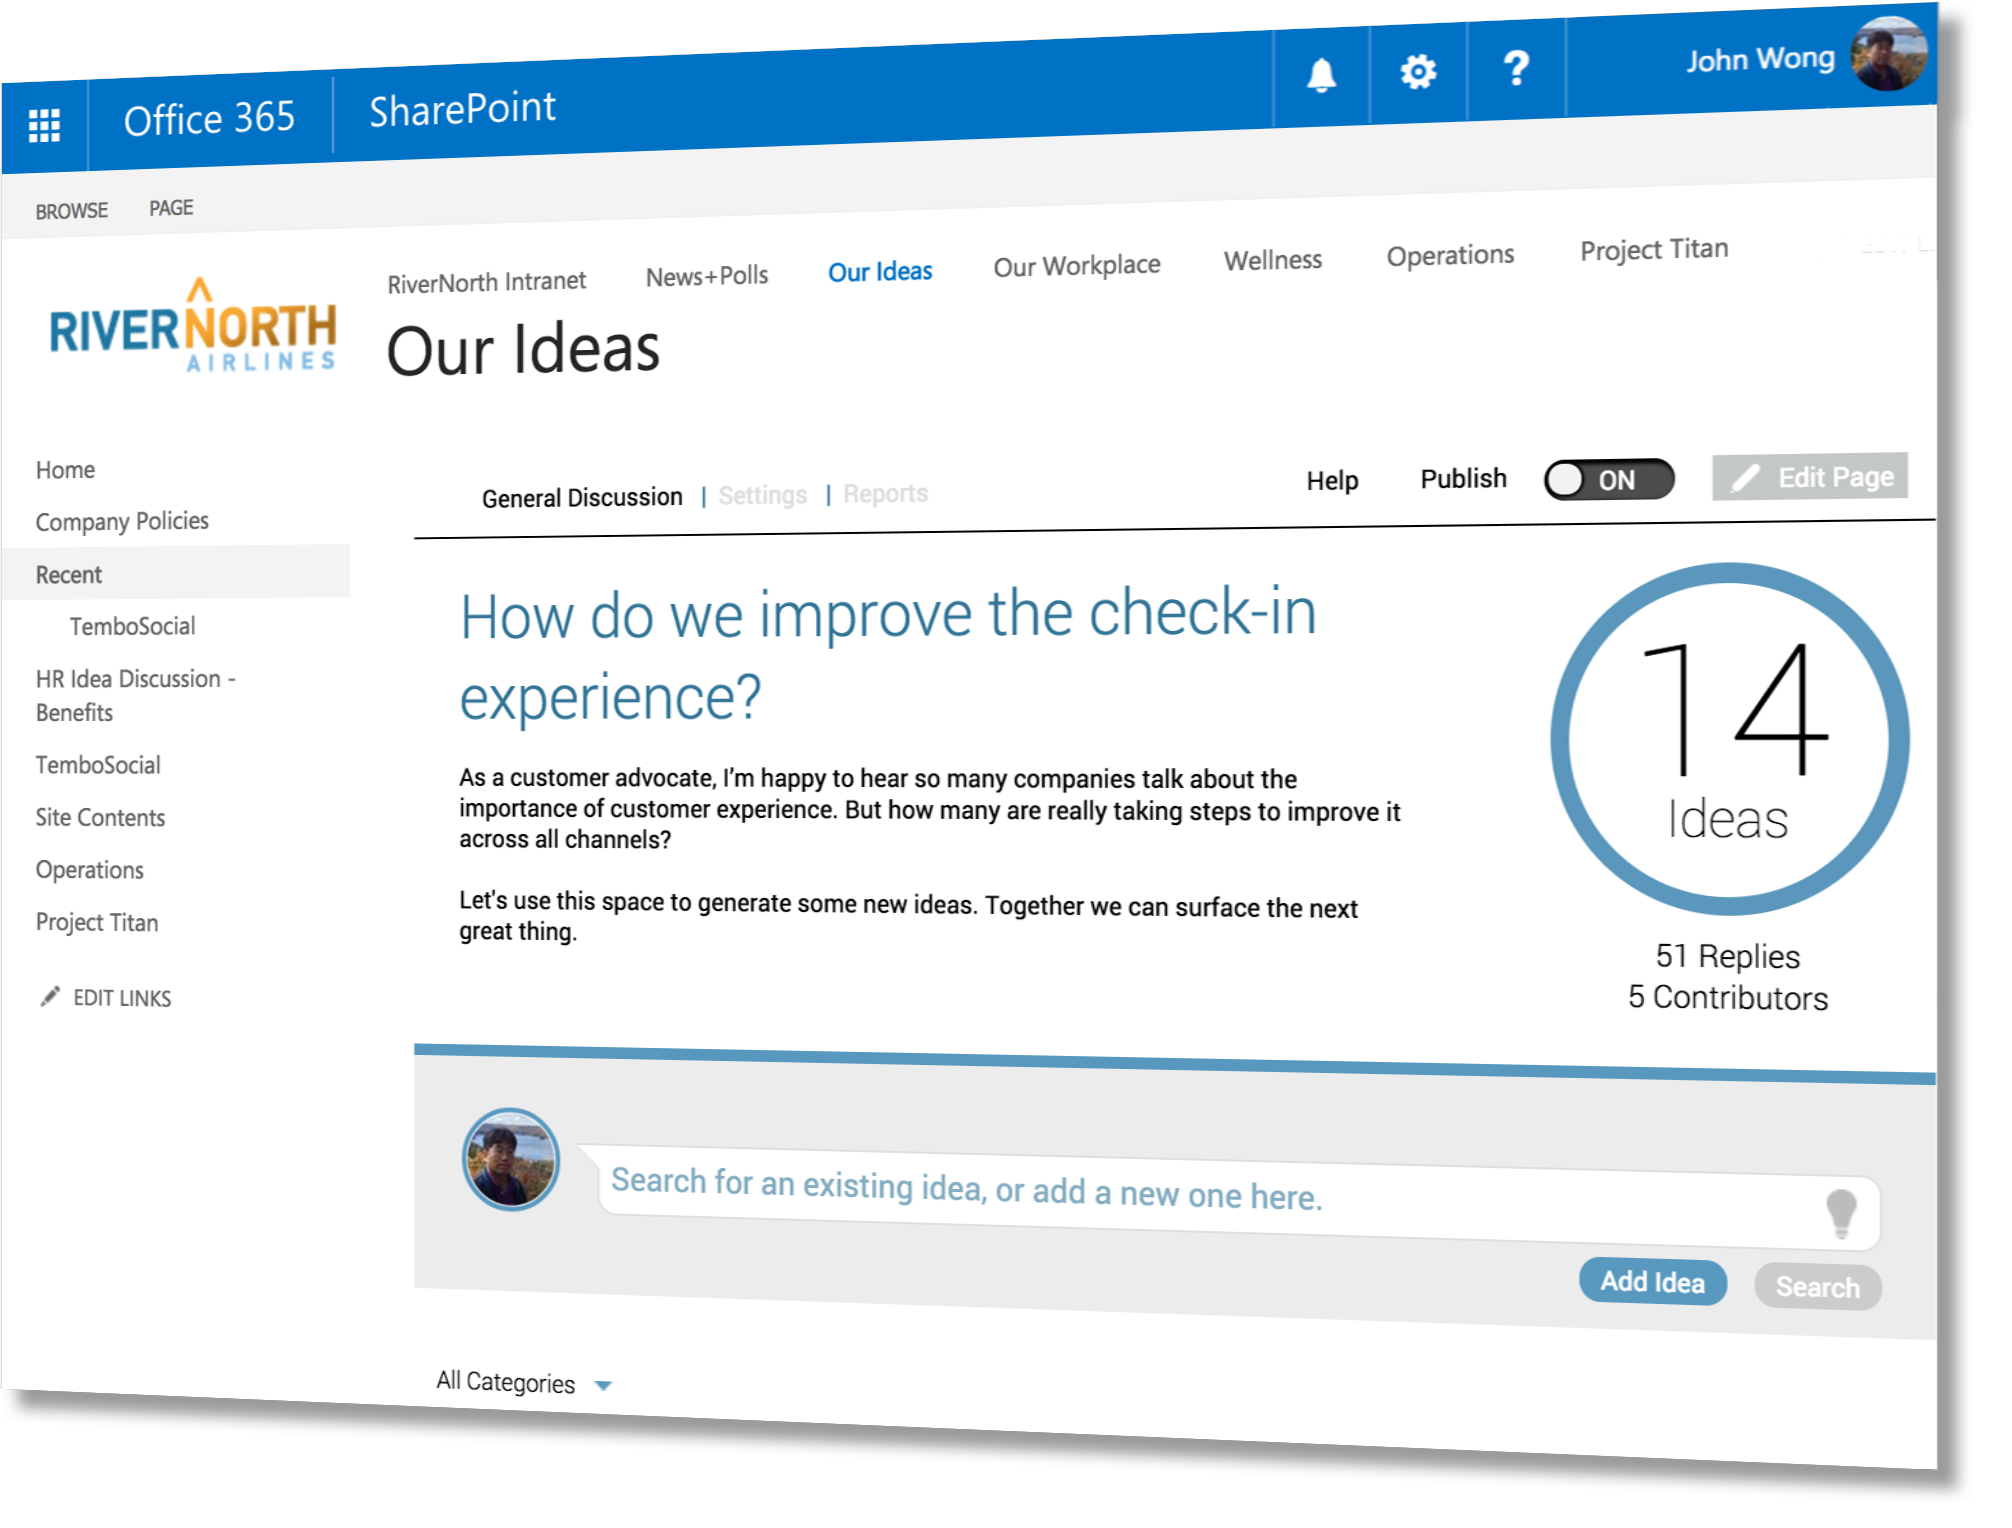 TemboSocial Ideas for SharePoint and Office 365